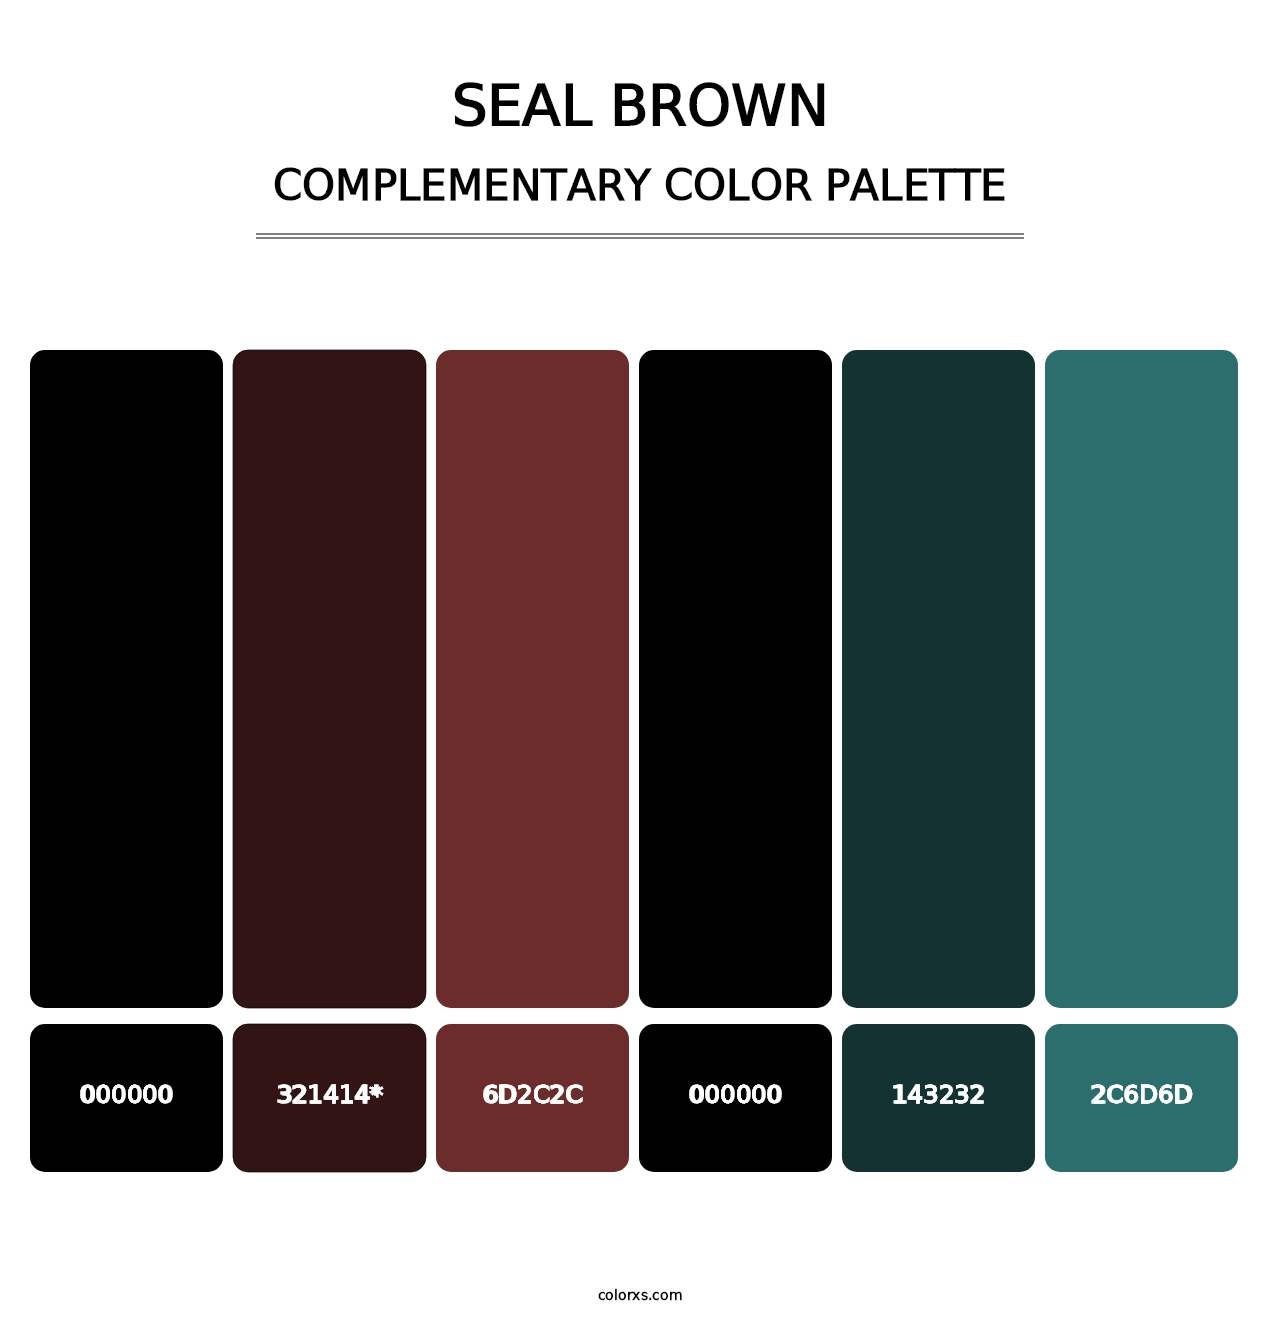 Seal brown - Complementary Color Palette